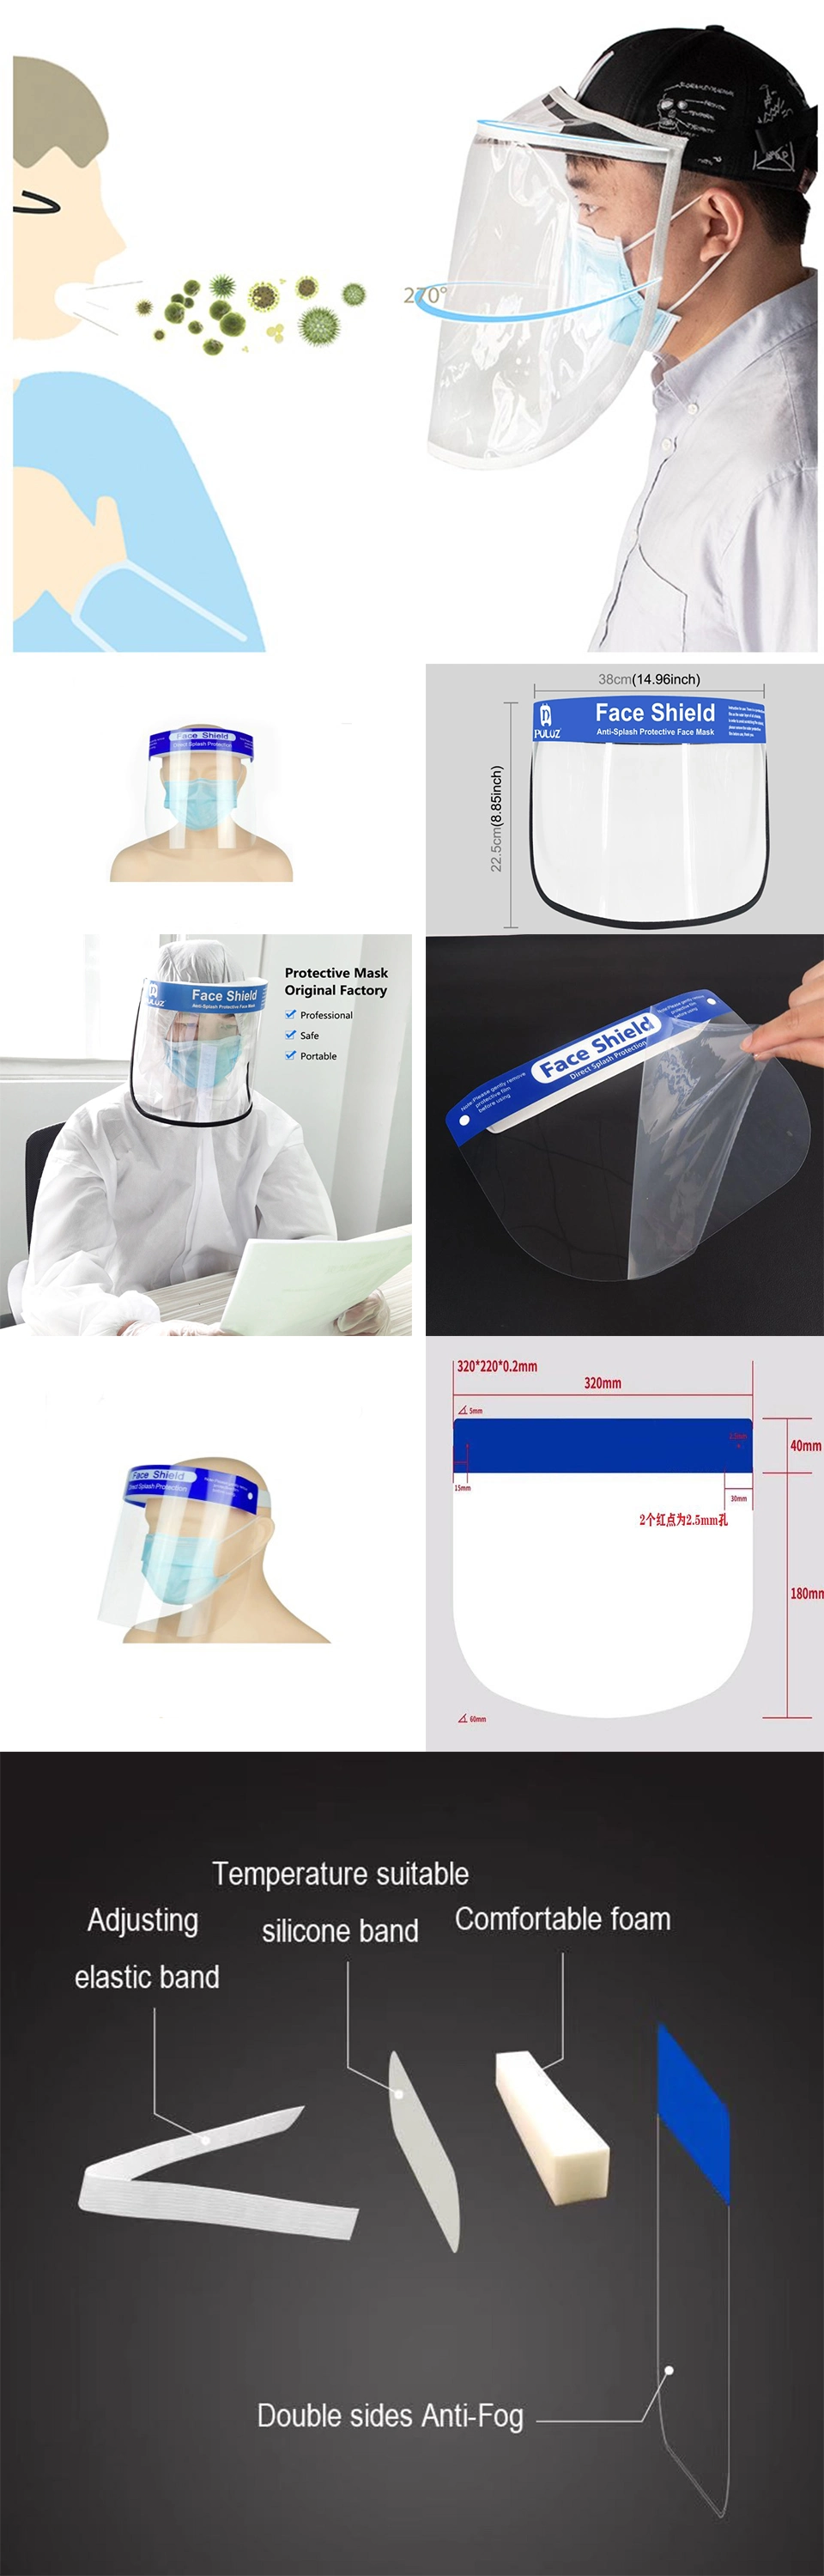 Surgical N95 KN95 FFP2 Face Facial Mask Disposable Medical PPE Gown Ce Particulate Respirator Wholesale Price Dust Face Mask 8210 1860 9332 3 Ply Gas